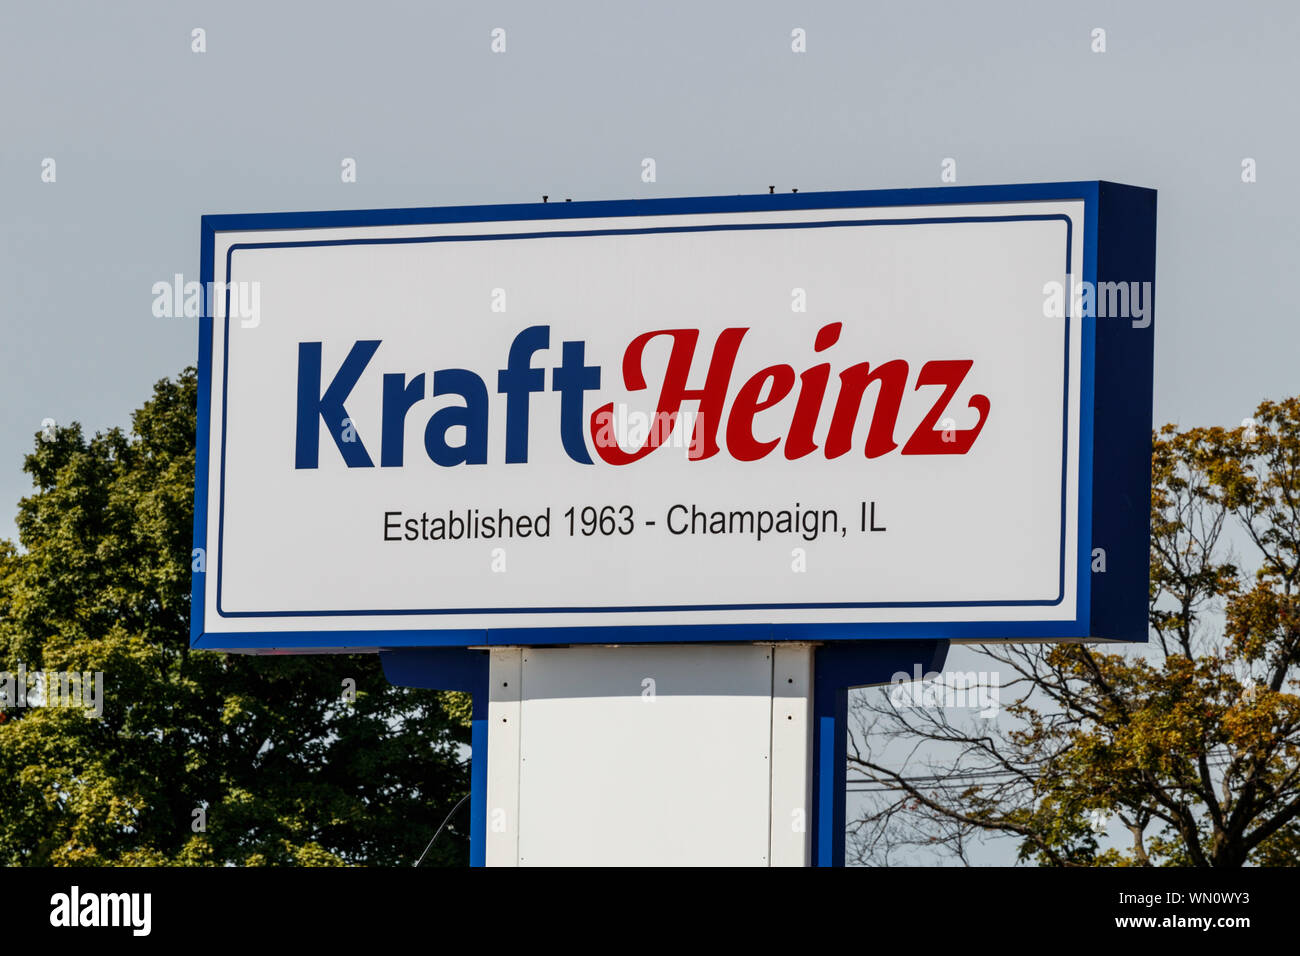 https://c8.alamy.com/comp/WN0WY3/champaign-circa-august-2019-kraft-heinz-company-manufacturing-plant-kraft-makes-its-macaroni-and-cheese-miracle-whip-and-kraft-mayonnaise-here-i-WN0WY3.jpg